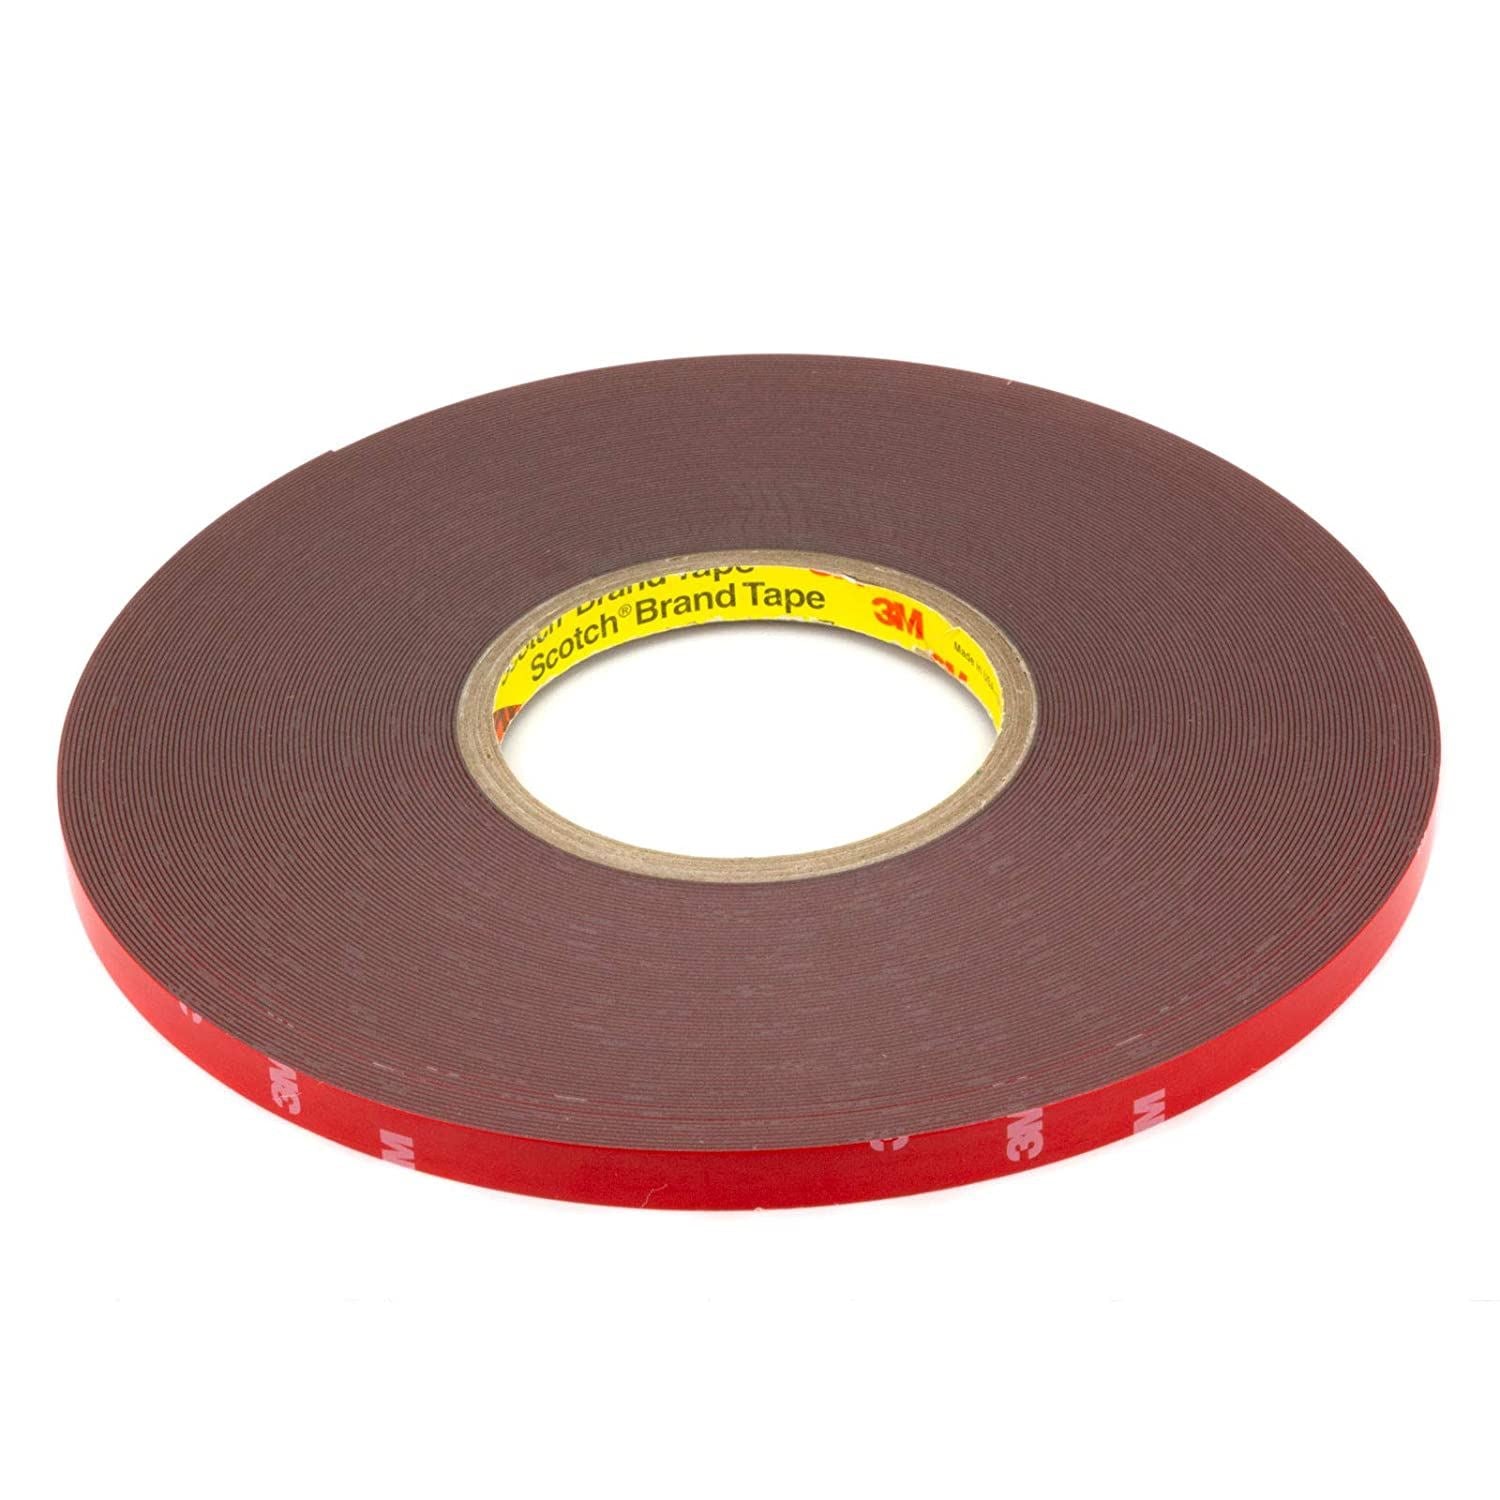 3M VHB Double-Sided Adhesive Tape - 4229P - 5mm x 33m Full Roll